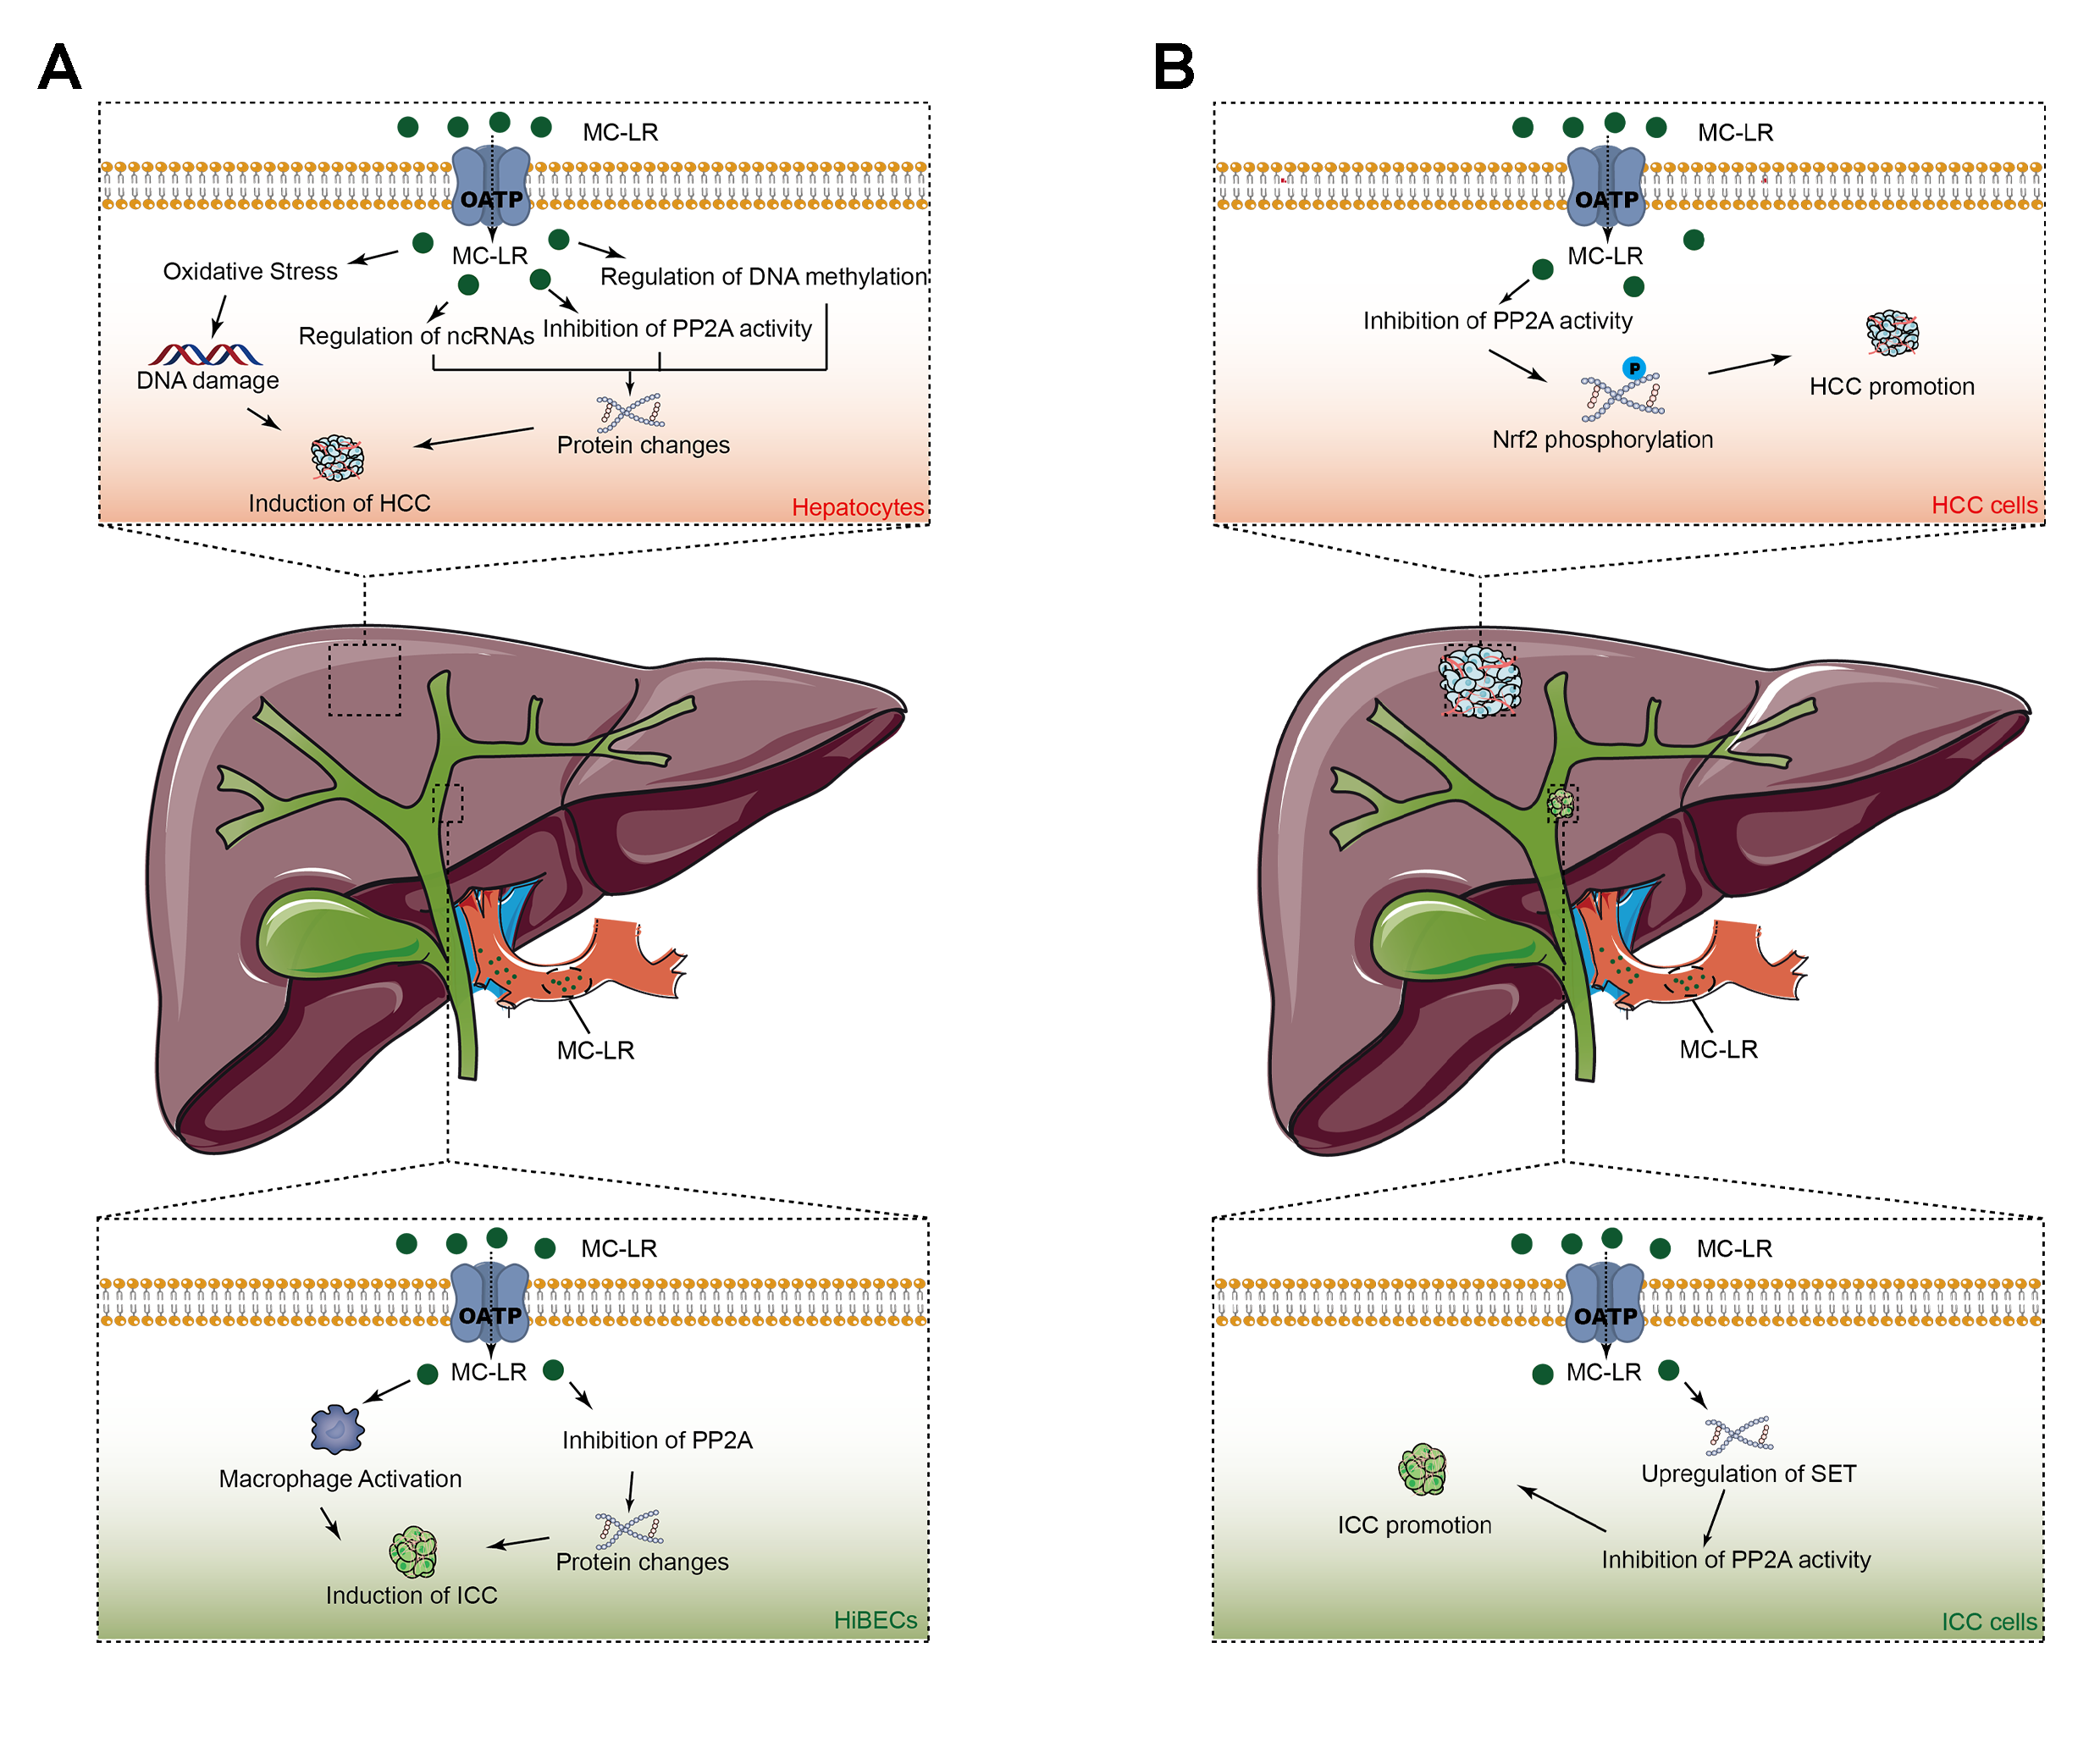 Figure 3. Schematic diagram of the possible molecular mechanisms underlying microcystin-LR-induced carcinogenesis (A) and tumor progression (B) of primary liver cancers. Abbreviation: HCC: hepatocellular carcinoma, ICC: intrahe-patic cholangiocarcinoma, OATP: organic anion transport polypeptide, PP2A: protein phosphatase 2 A.